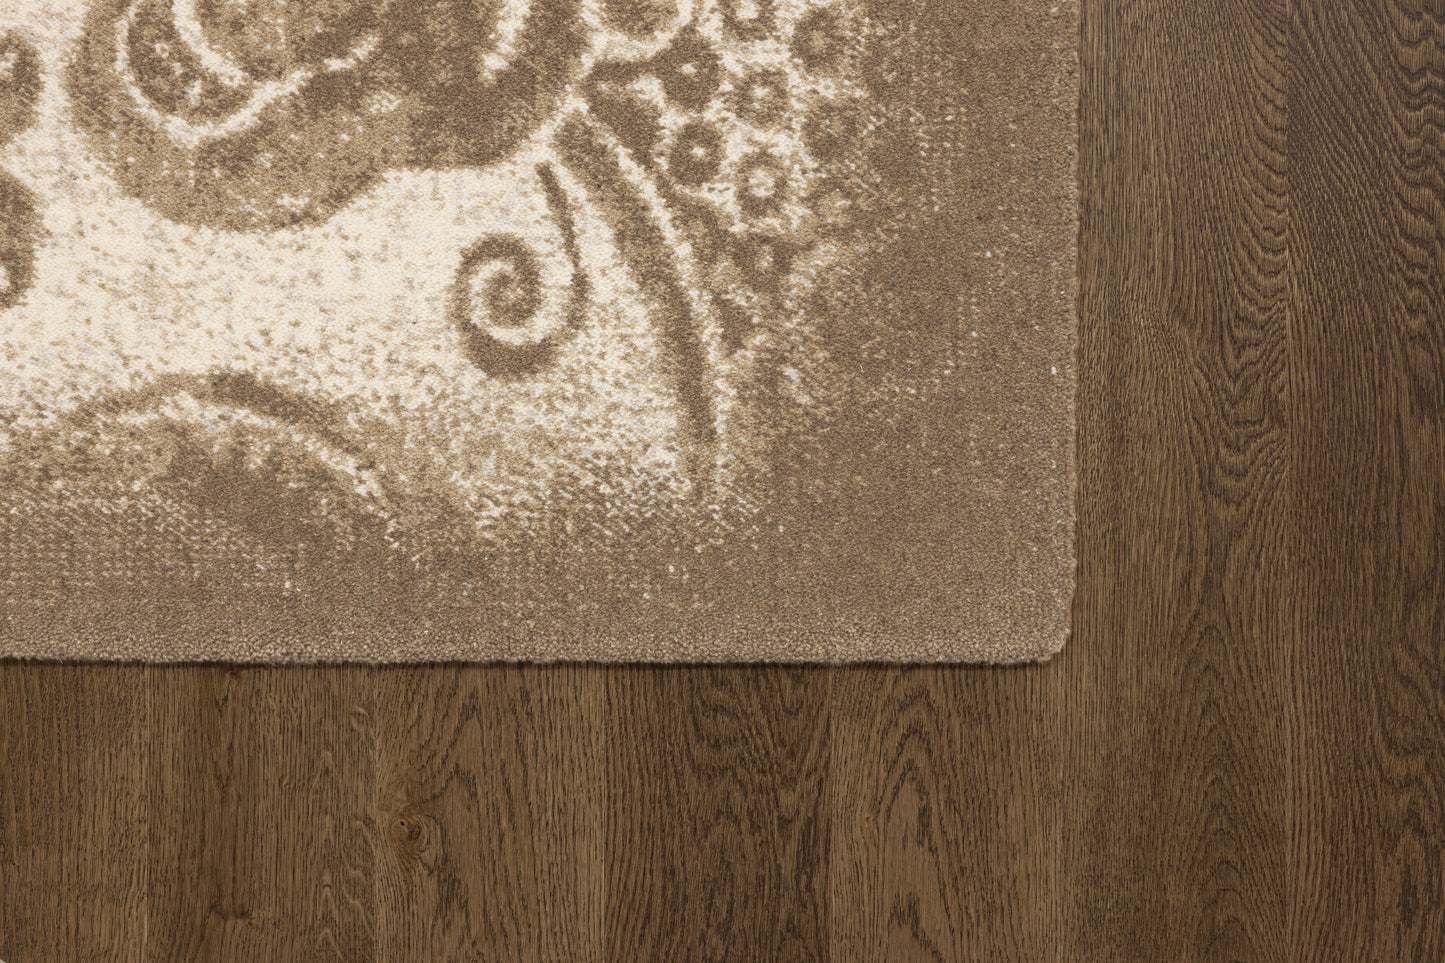 Agnella Rugs Design Discoveries V&A Collection DAMASK Beige - Free Delivery